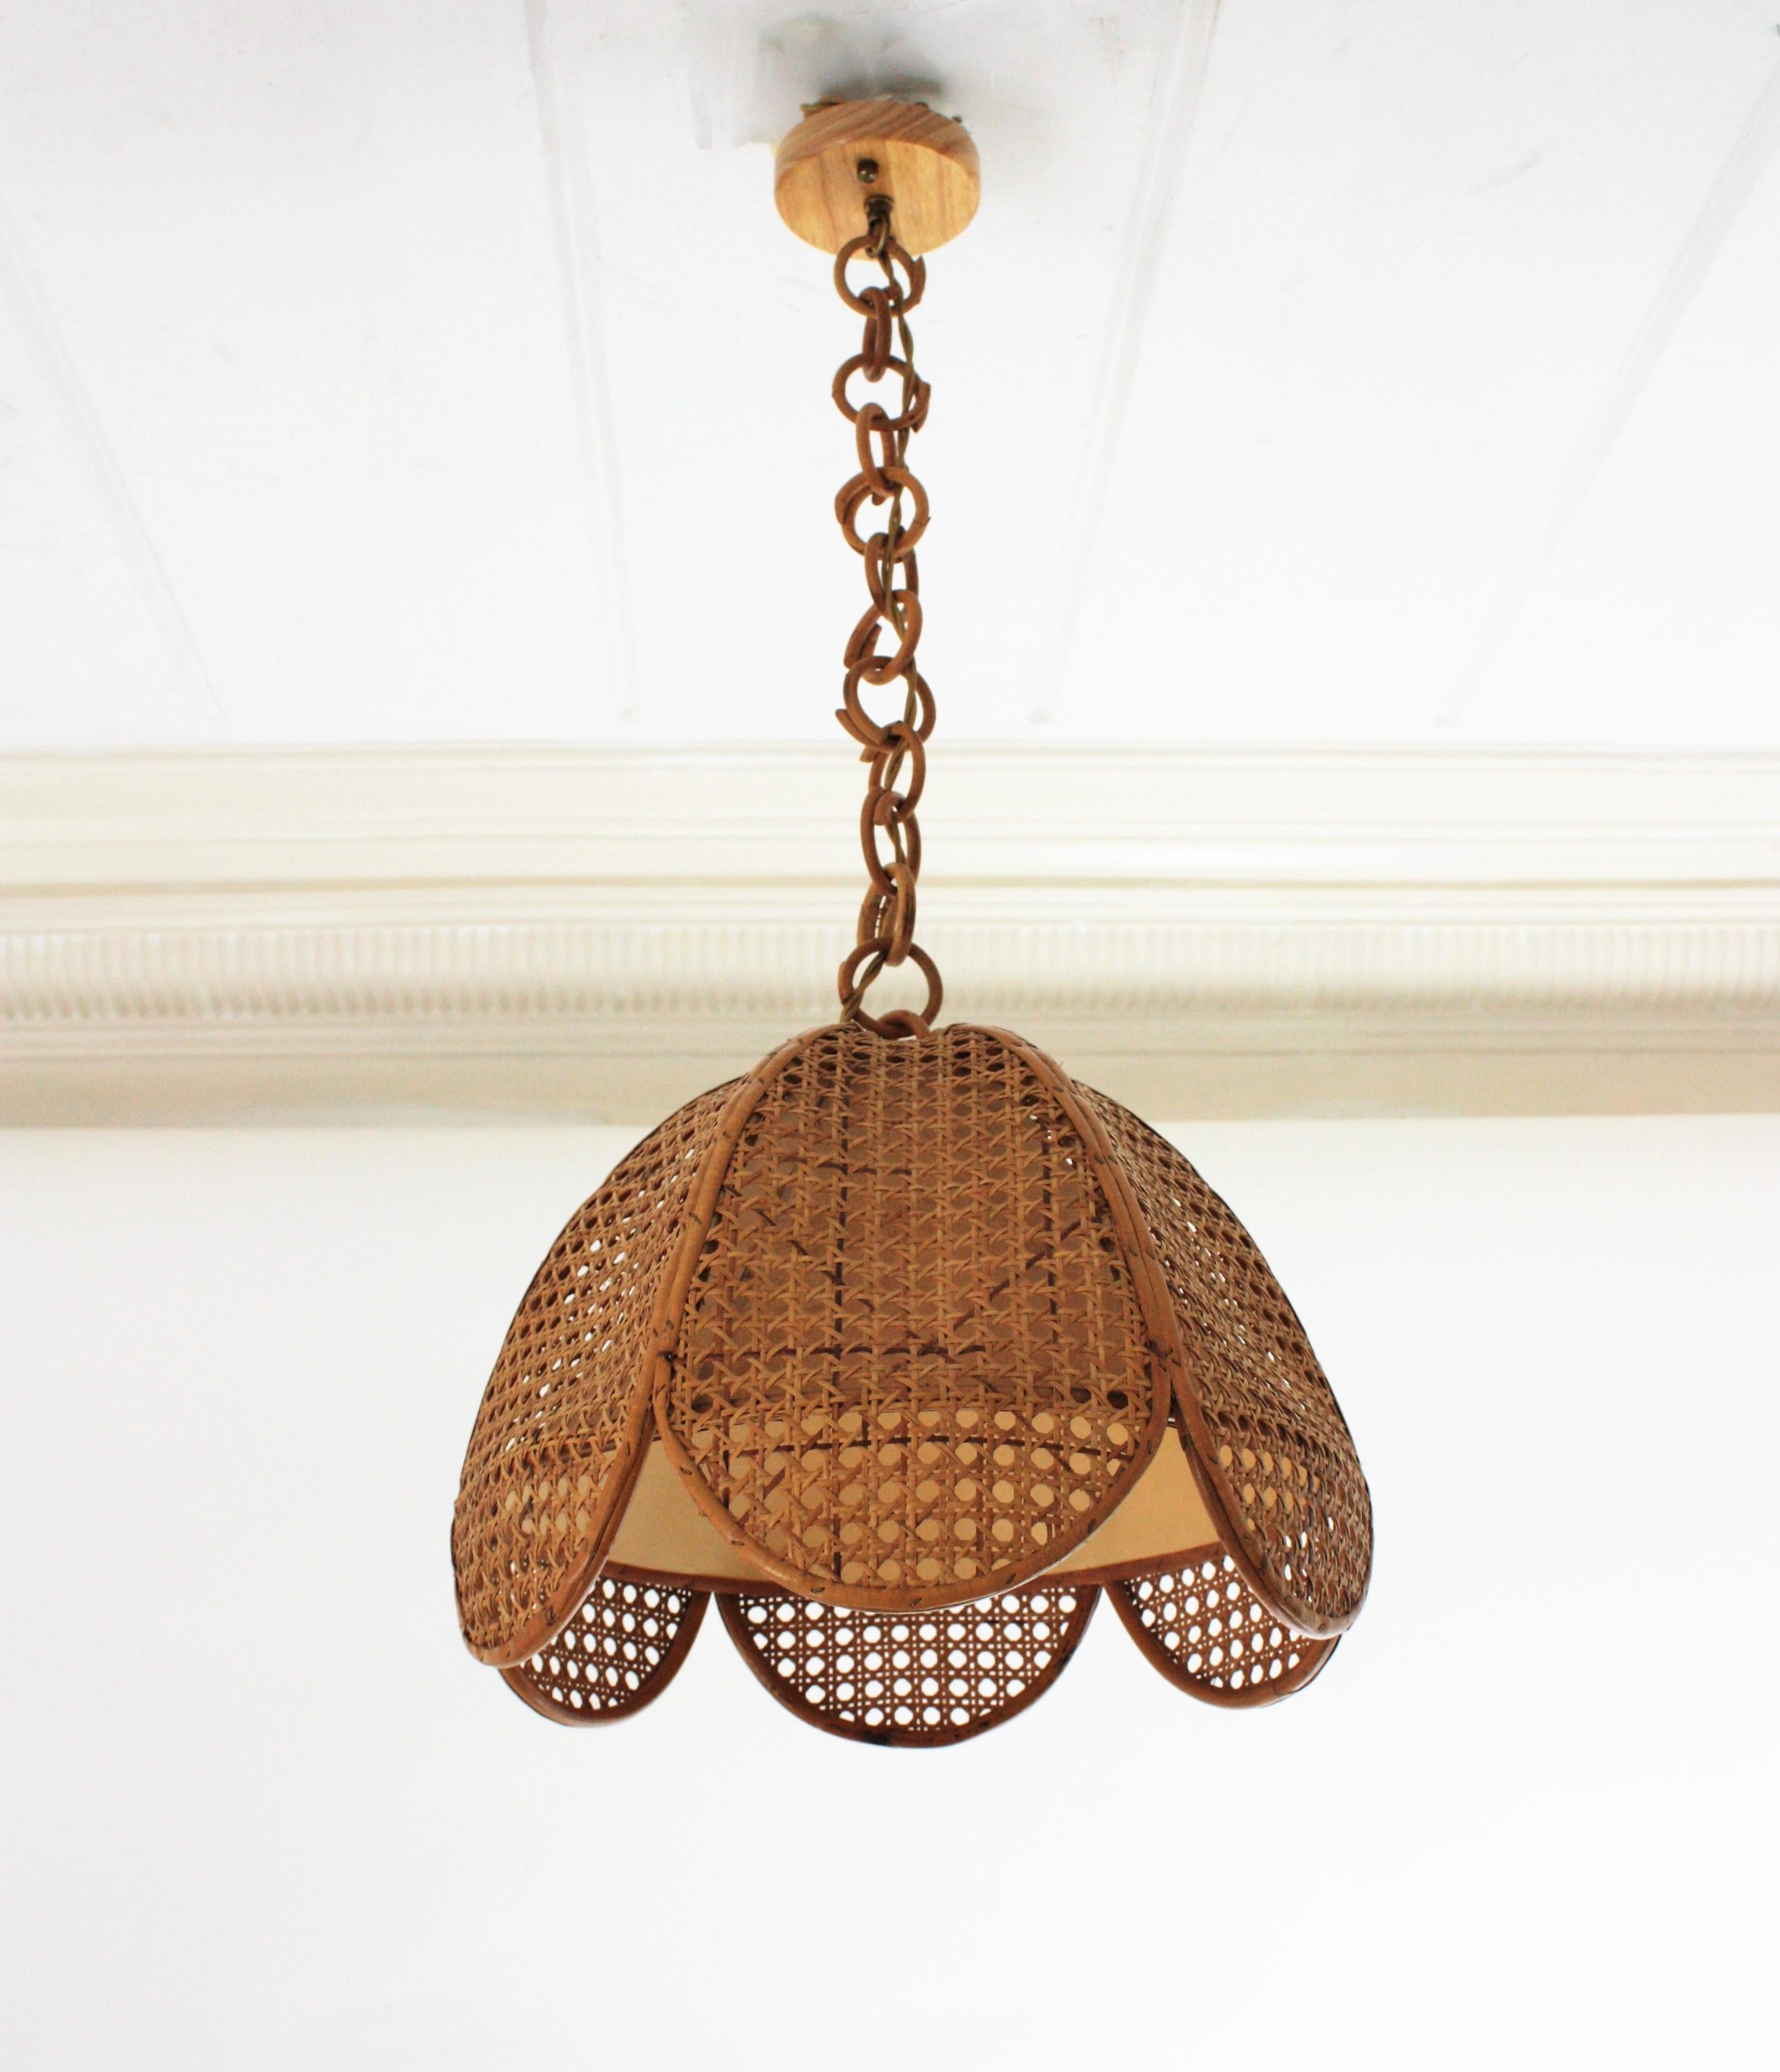 Spanish Modernist Woven Wicker Rattan Palm Pendant Light, 1960s In Good Condition For Sale In Barcelona, ES